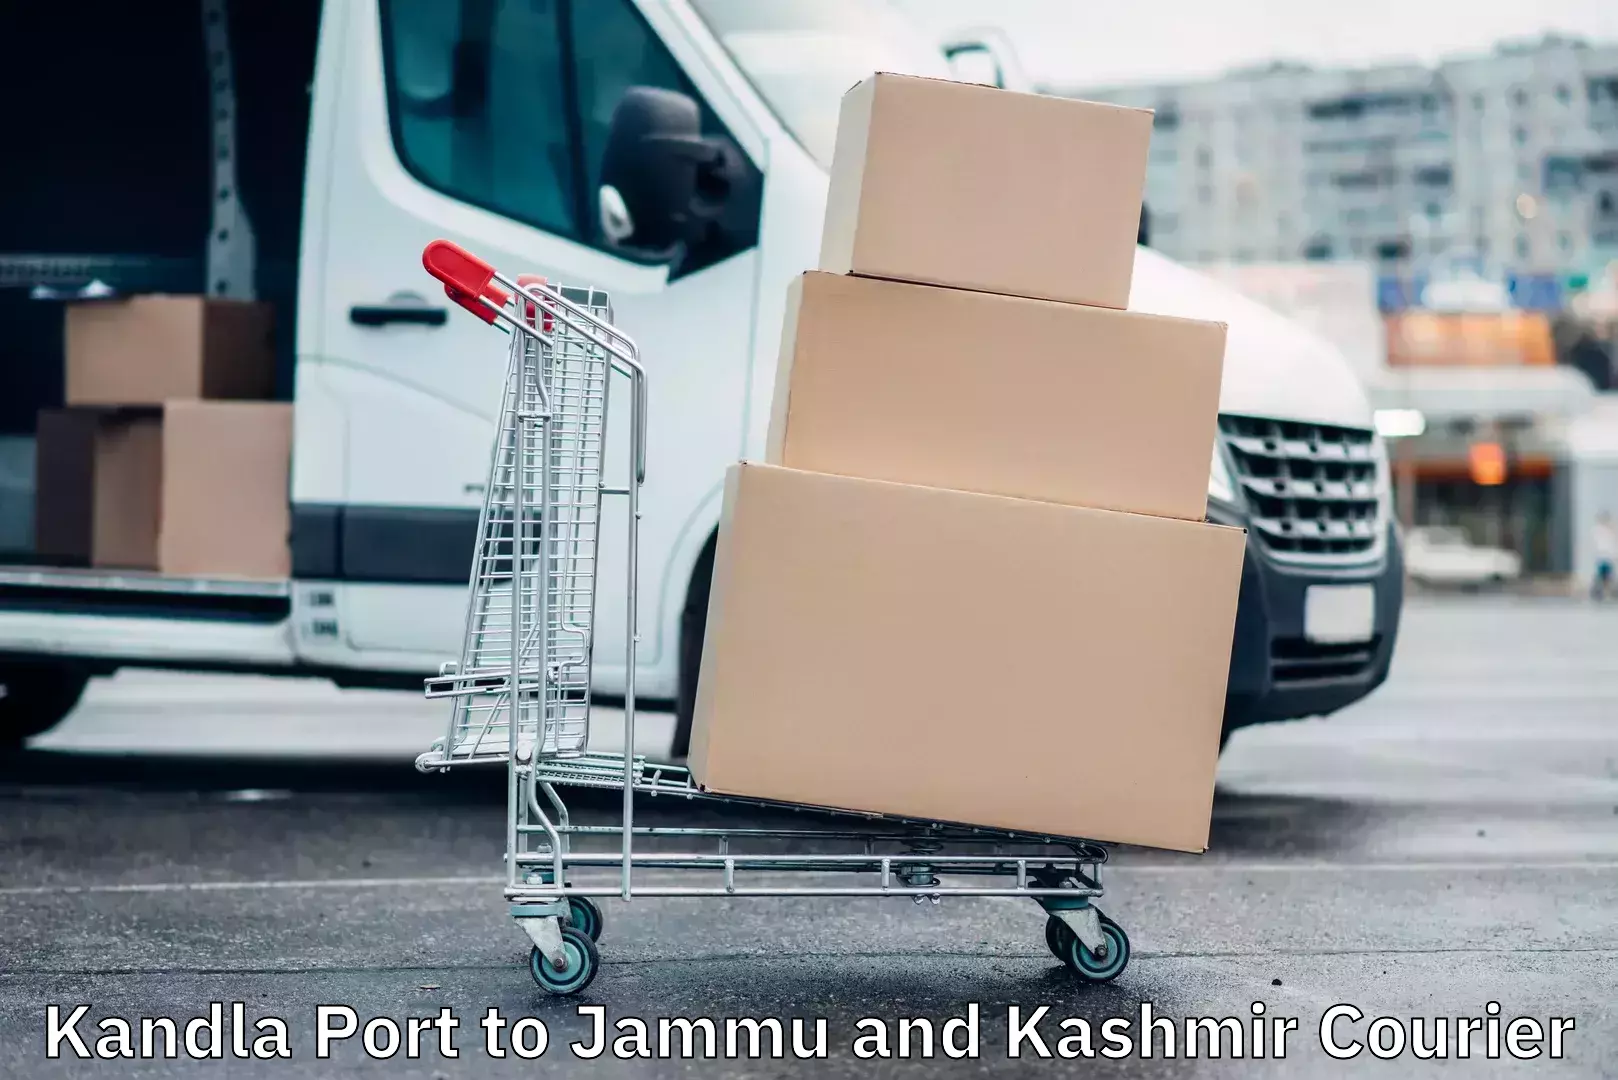 Ocean freight courier in Kandla Port to Jammu and Kashmir